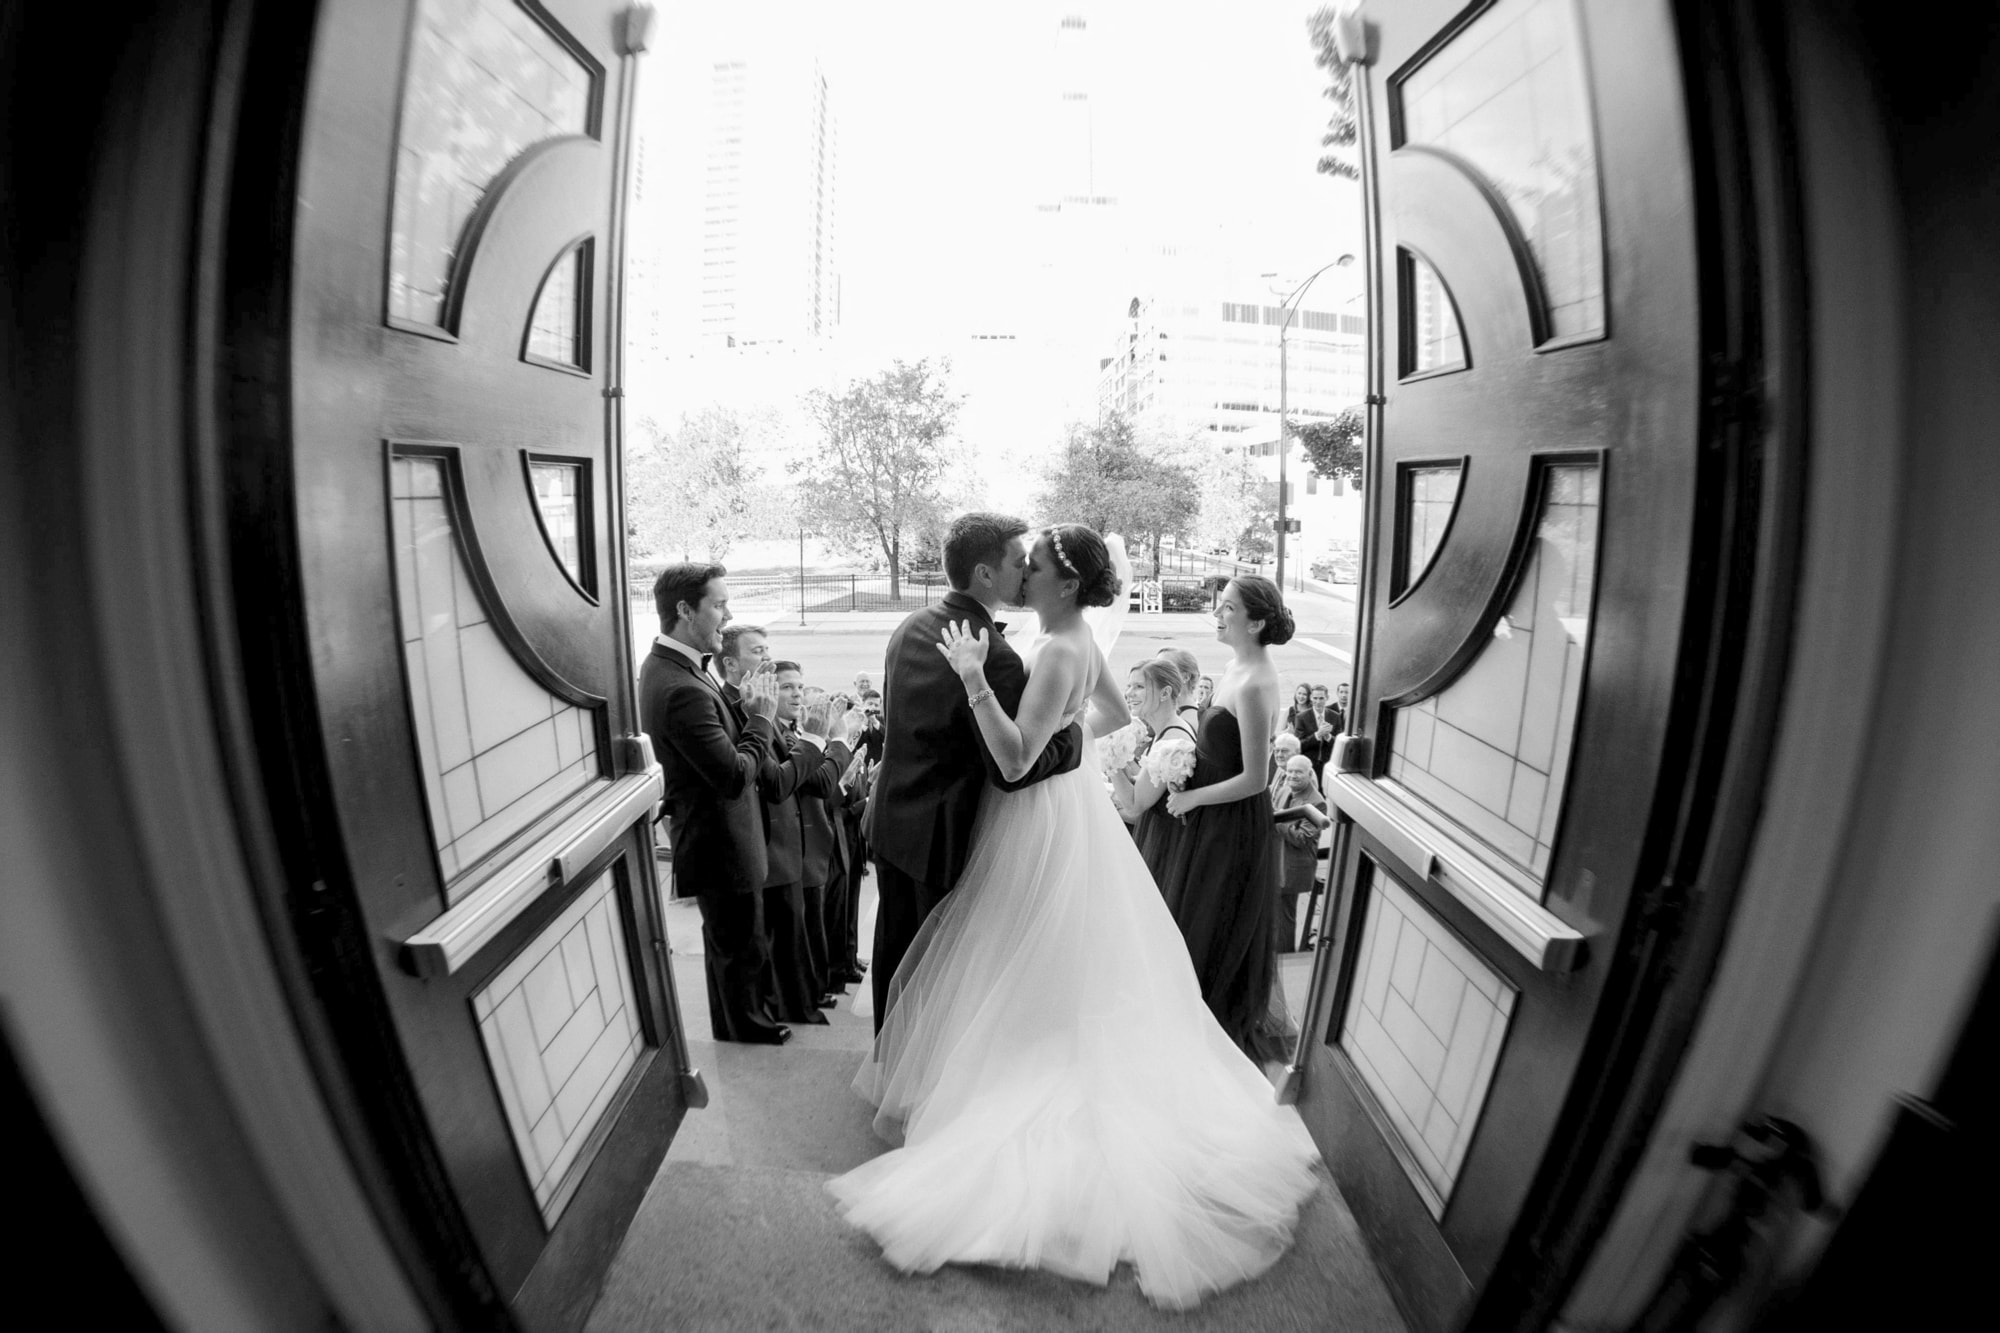 Romantic exit from wedding ceremony at Old St. Patrick's church